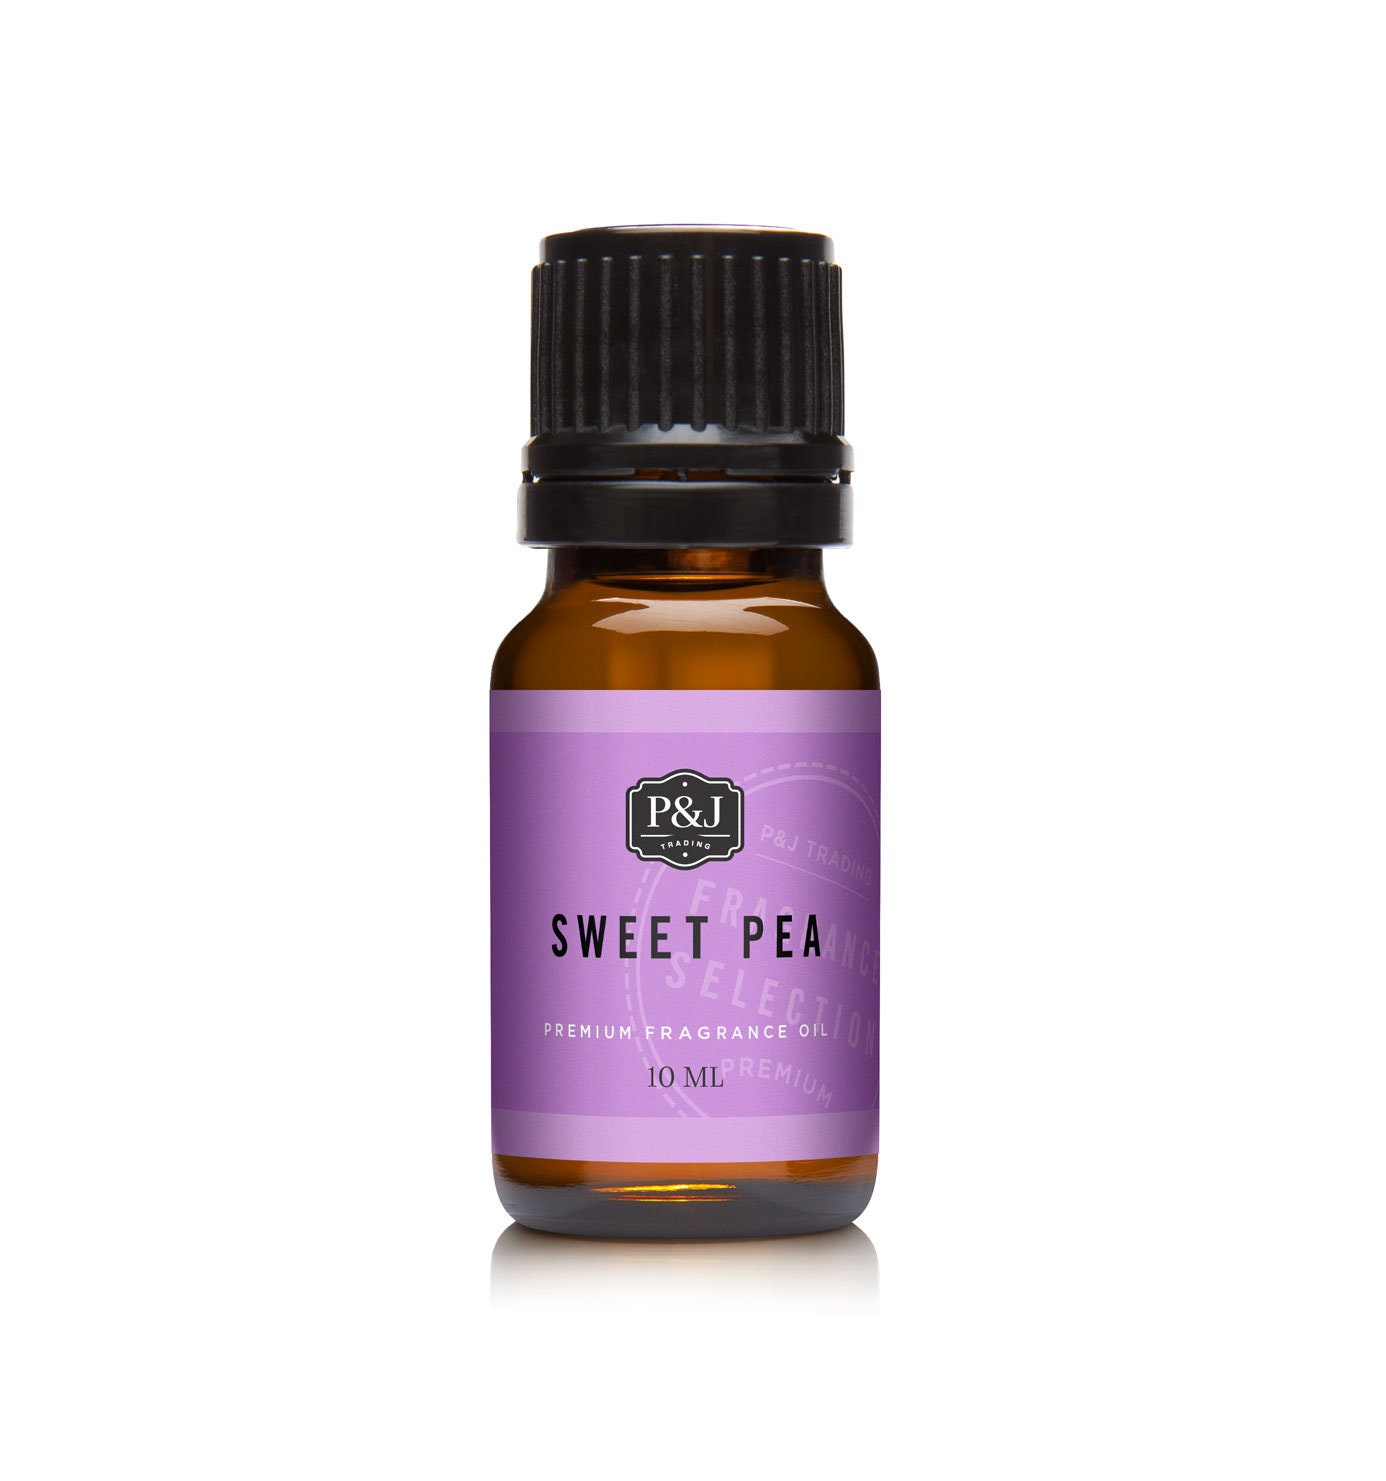 Sweet Pea Essential Oil - 100% Pure Aromatherapy Grade Essential Oil by Nature's Note Organics - 4 fl oz